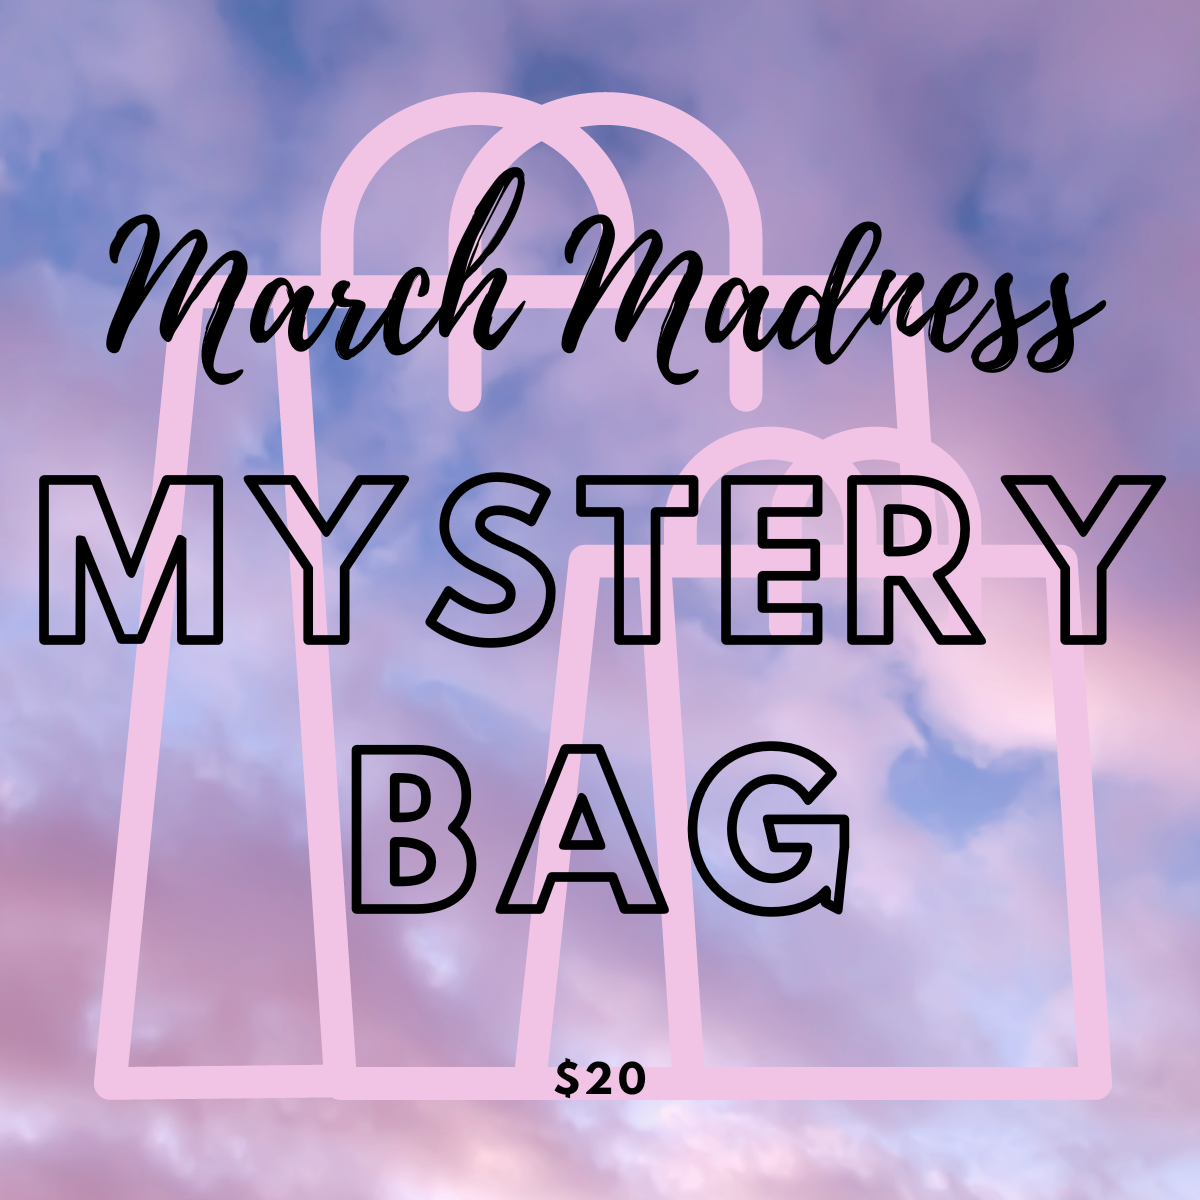 March Madness Mystery Bag